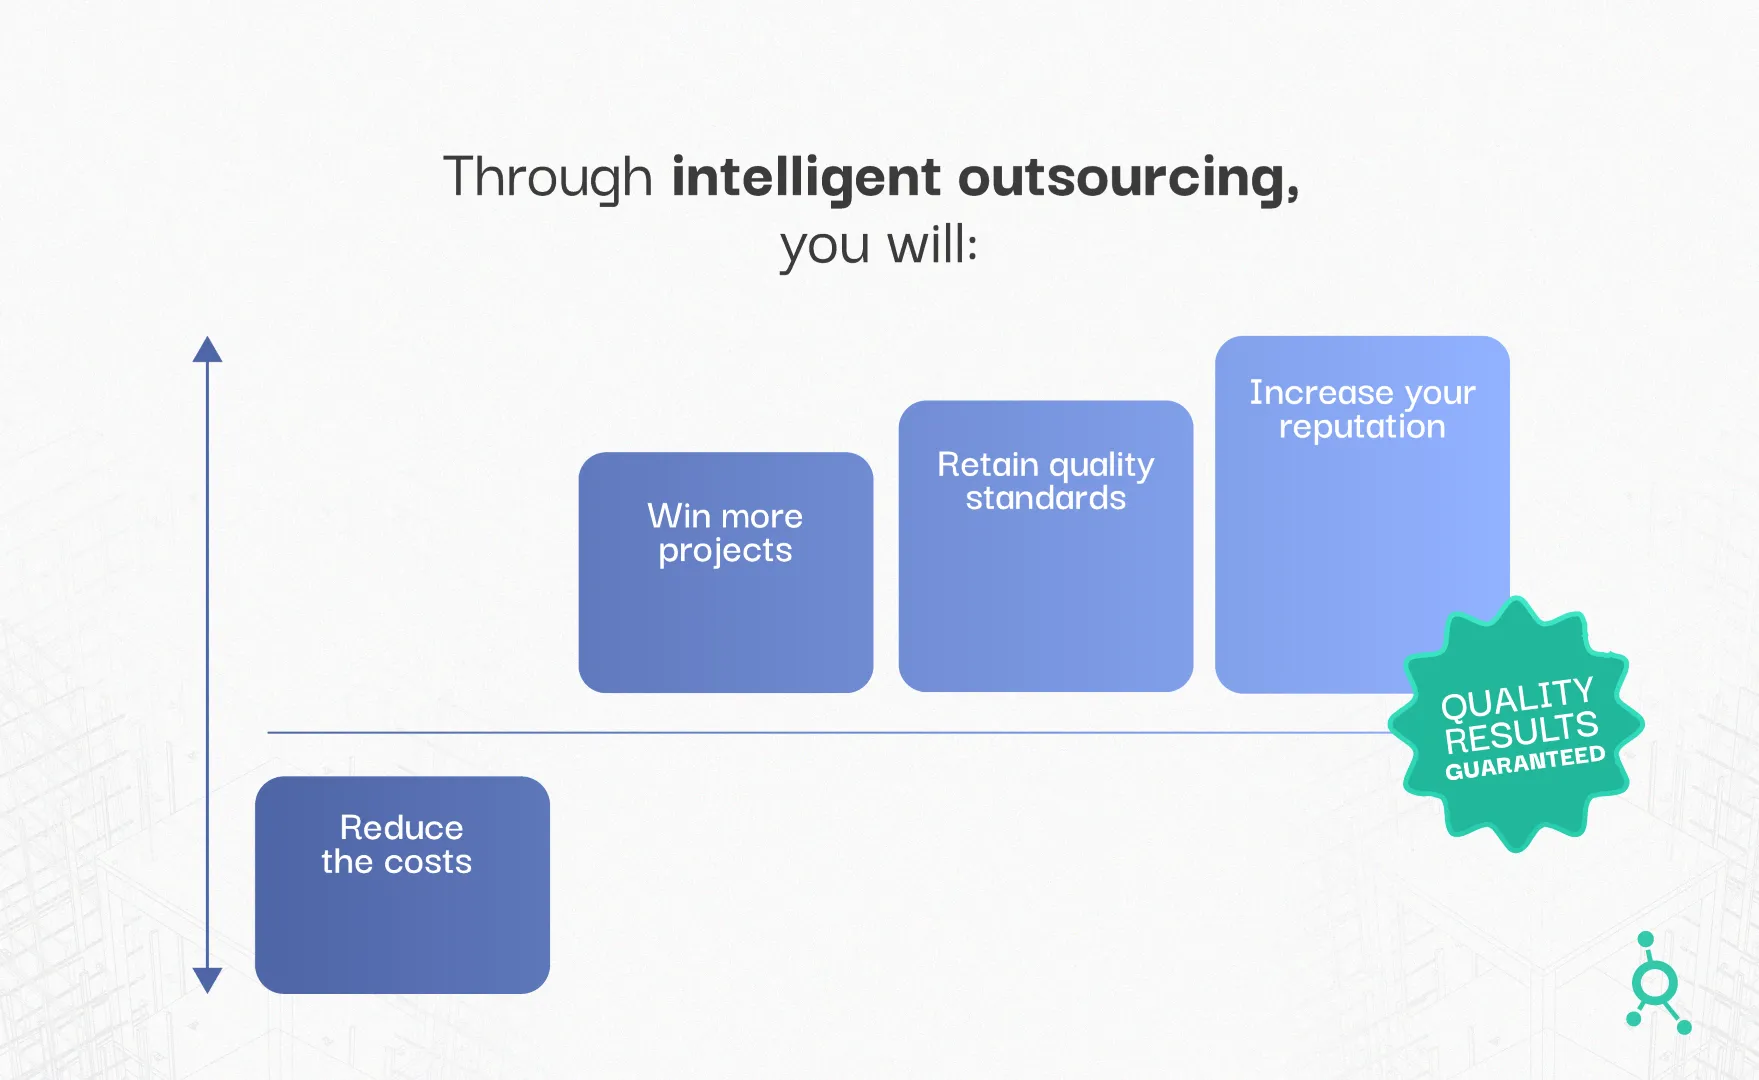 Inteligent outsourcing